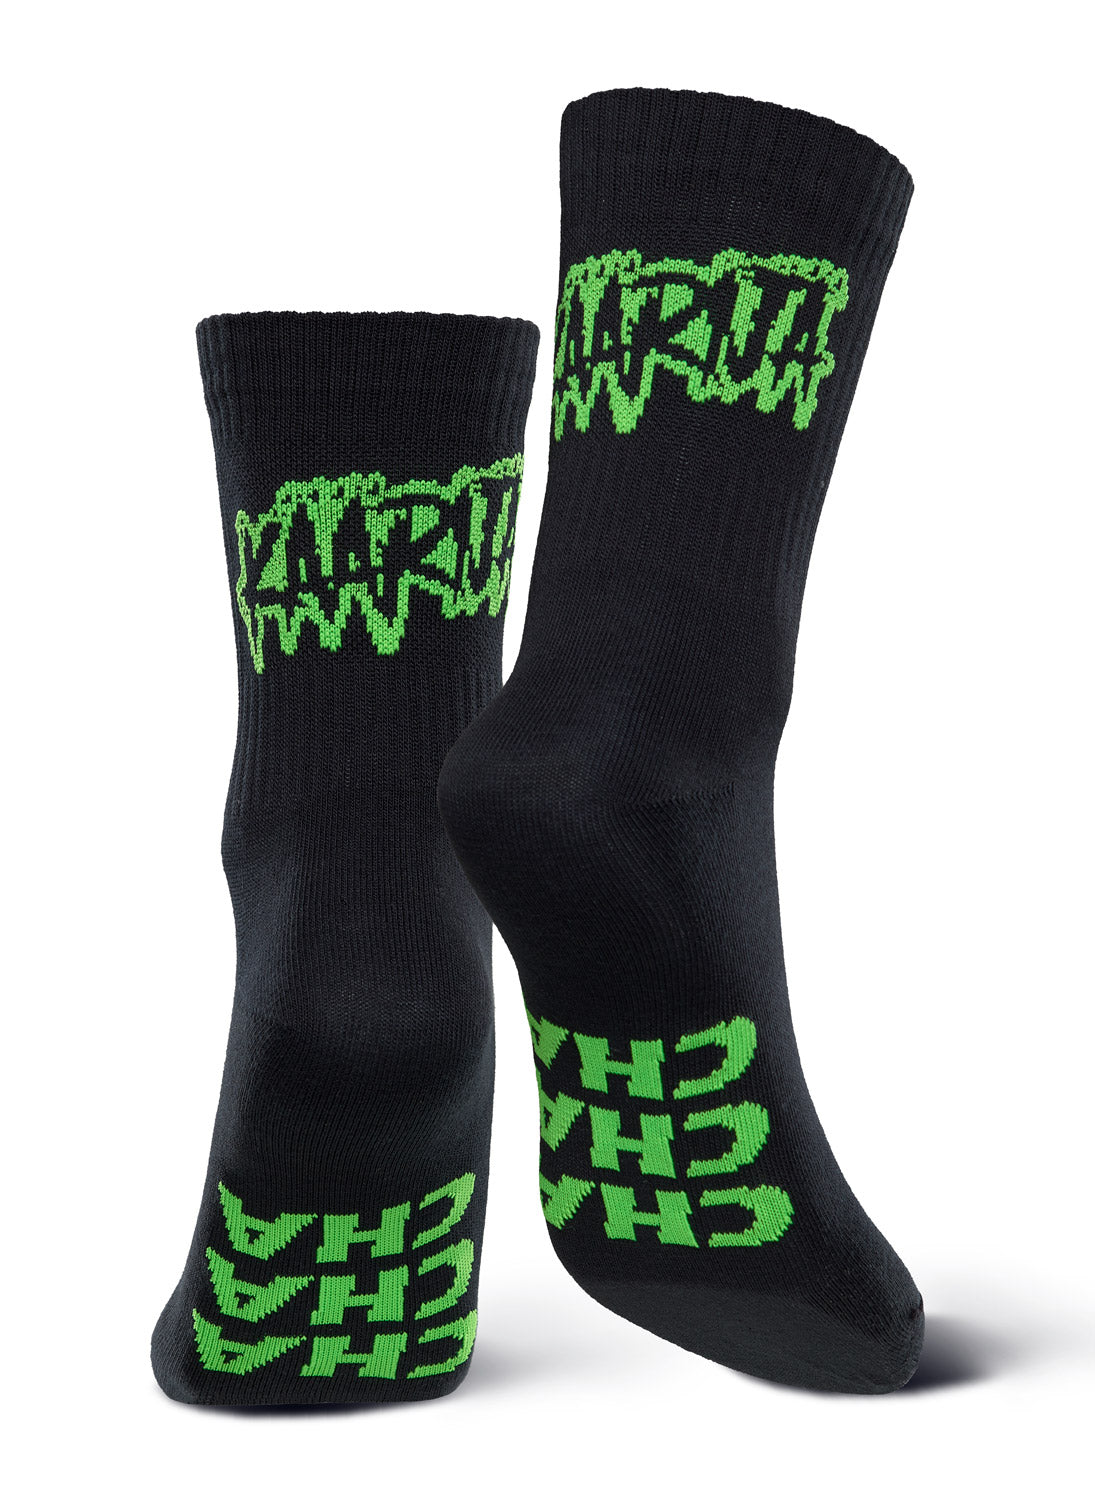 Black socks that have text in green both on leg part and sole. Text on leg says Kaarija and on sole Cha Cha Cha